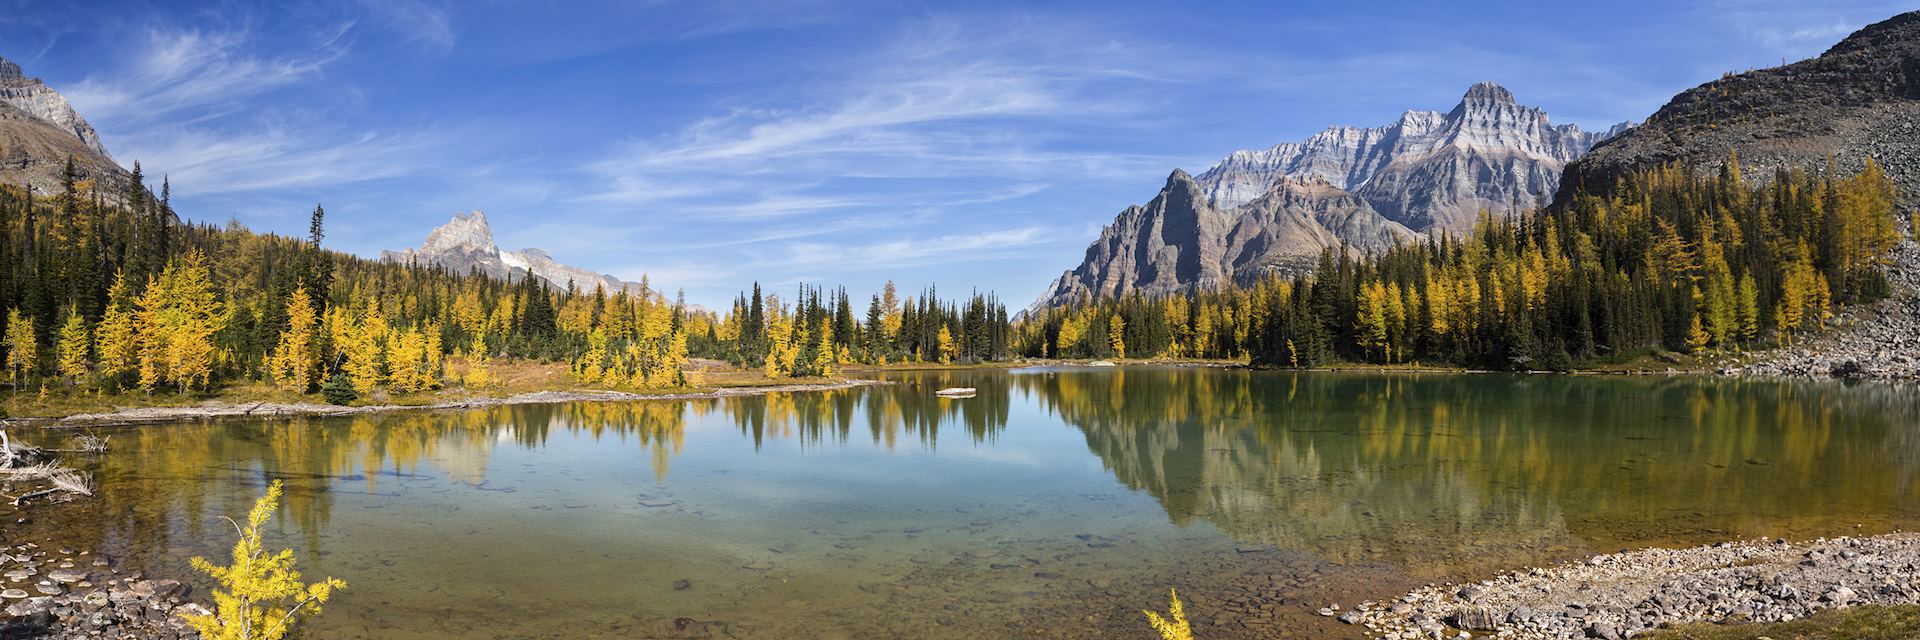 Highlights of Canada's west self-drive | Audley Travel UK